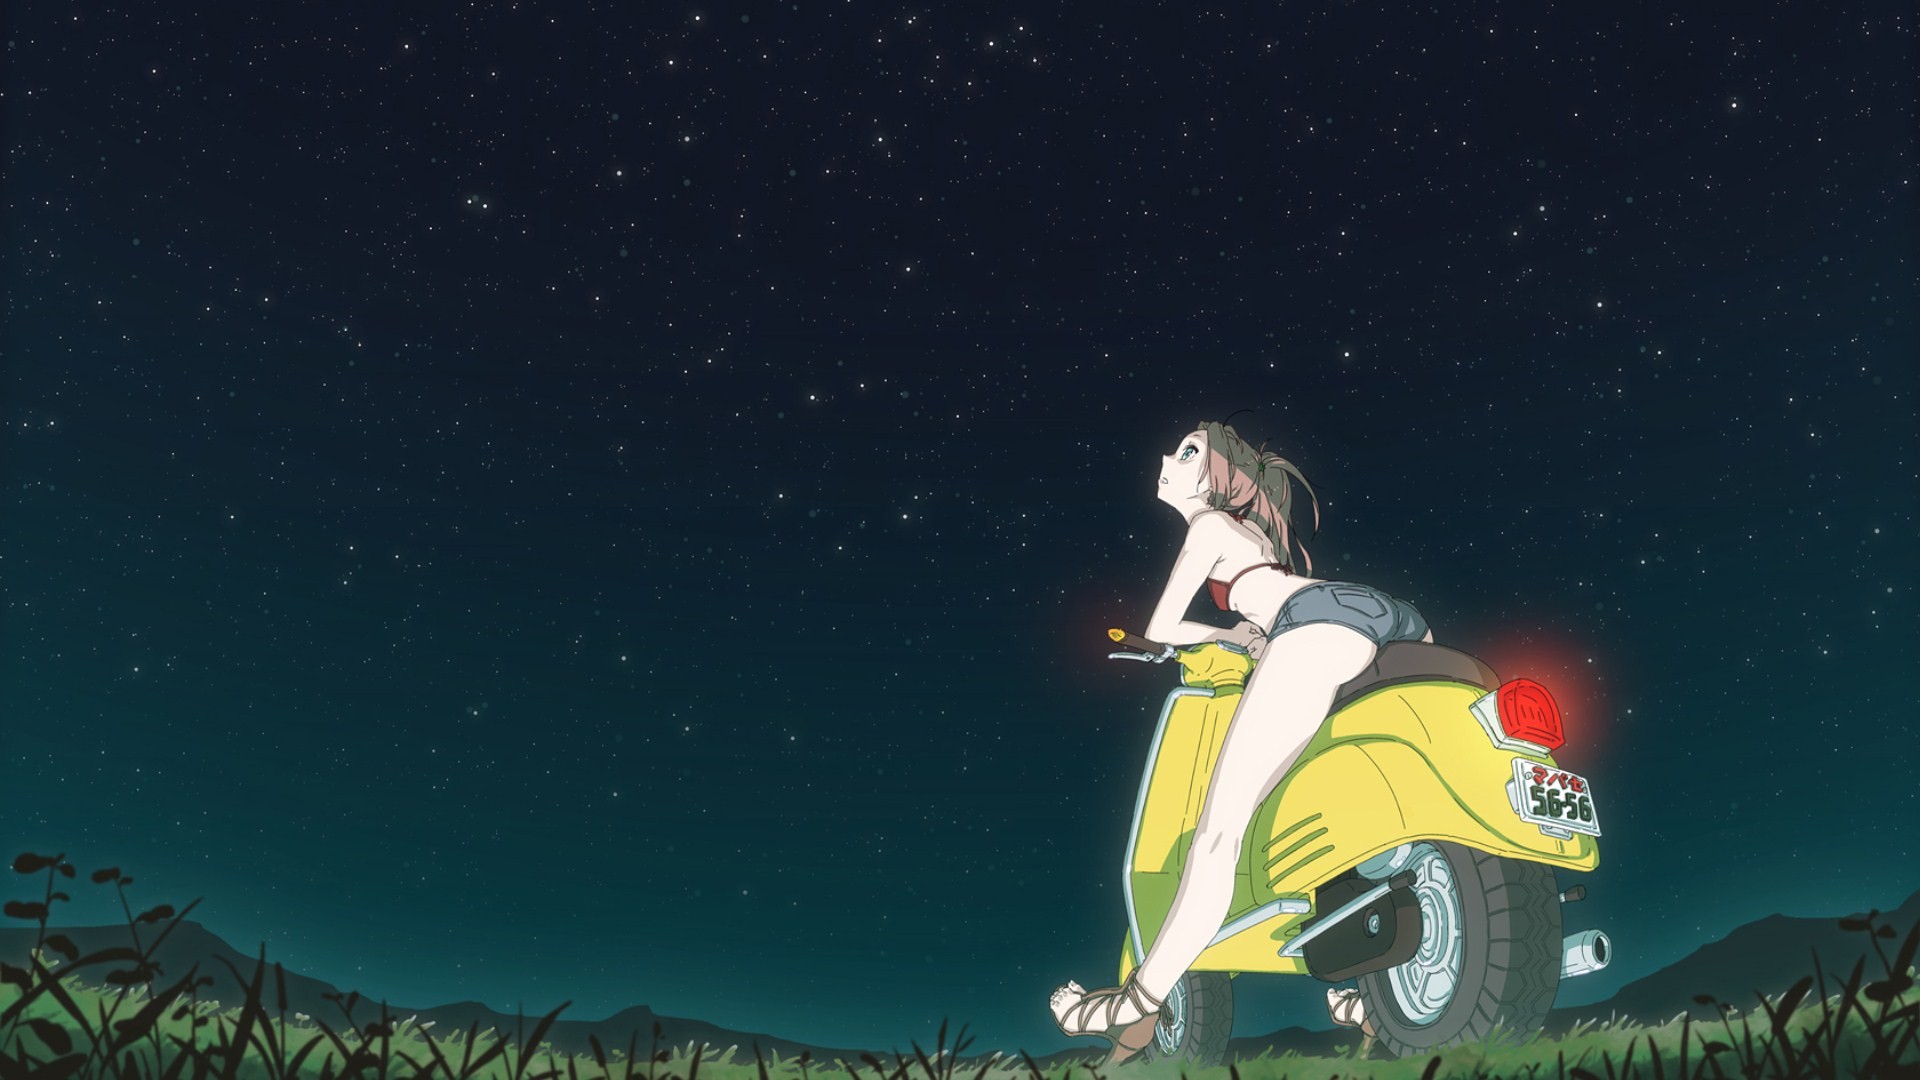 Anime 1920x1080 anime girls FLCL Haruhara Haruko scooters night space Vespa women with scooters legs sky starry night vehicle looking up ass bra numbers women outdoors outdoors short shorts